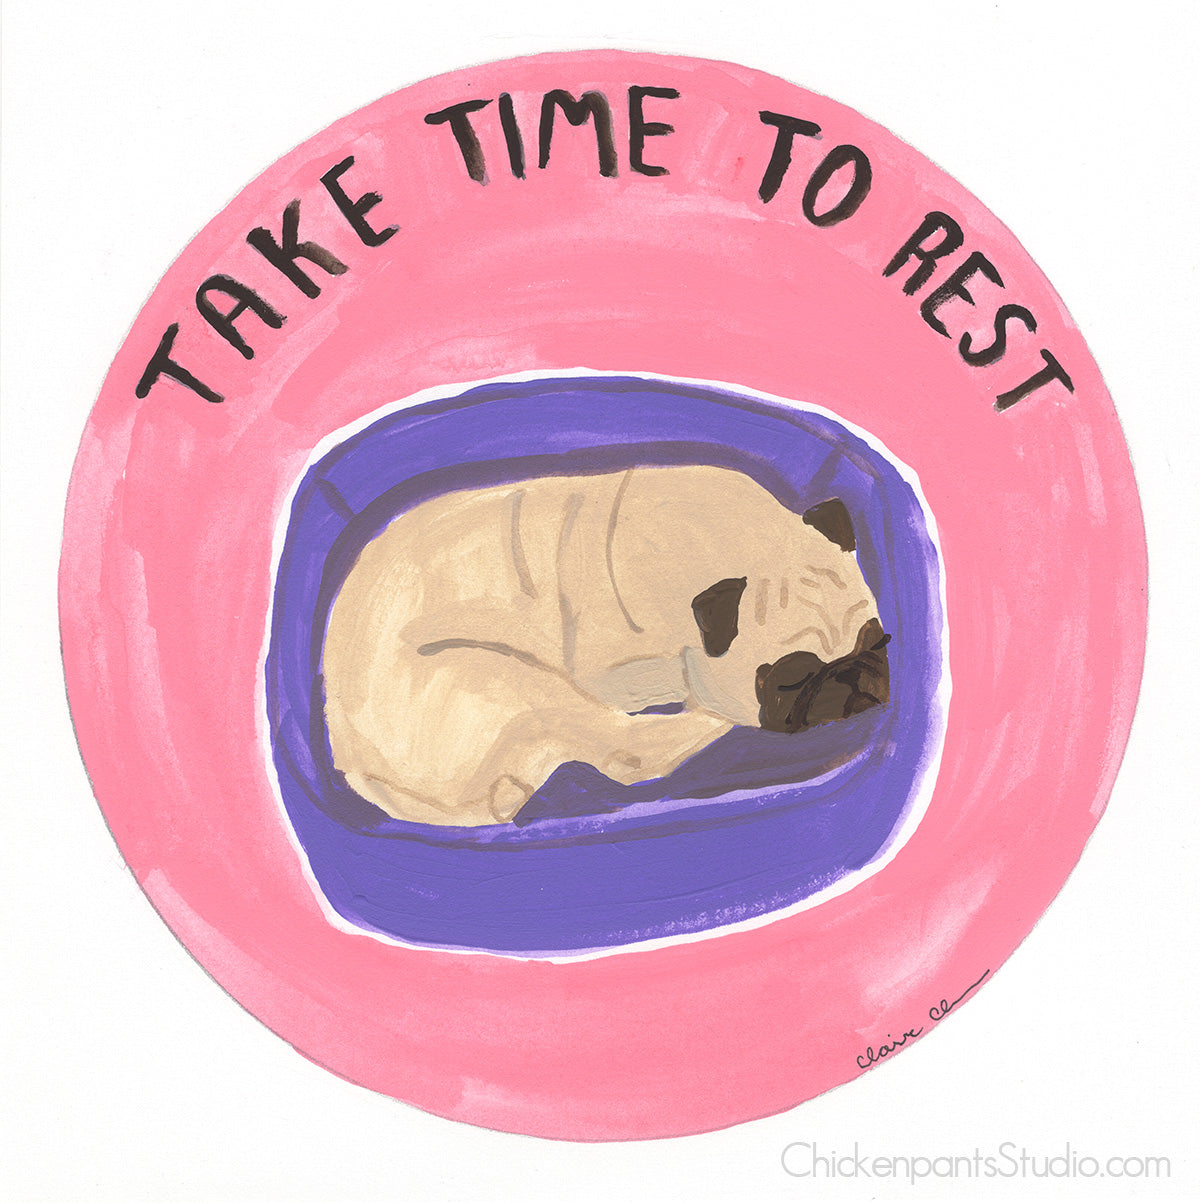 Take Time To Rest - Original Pug Painting